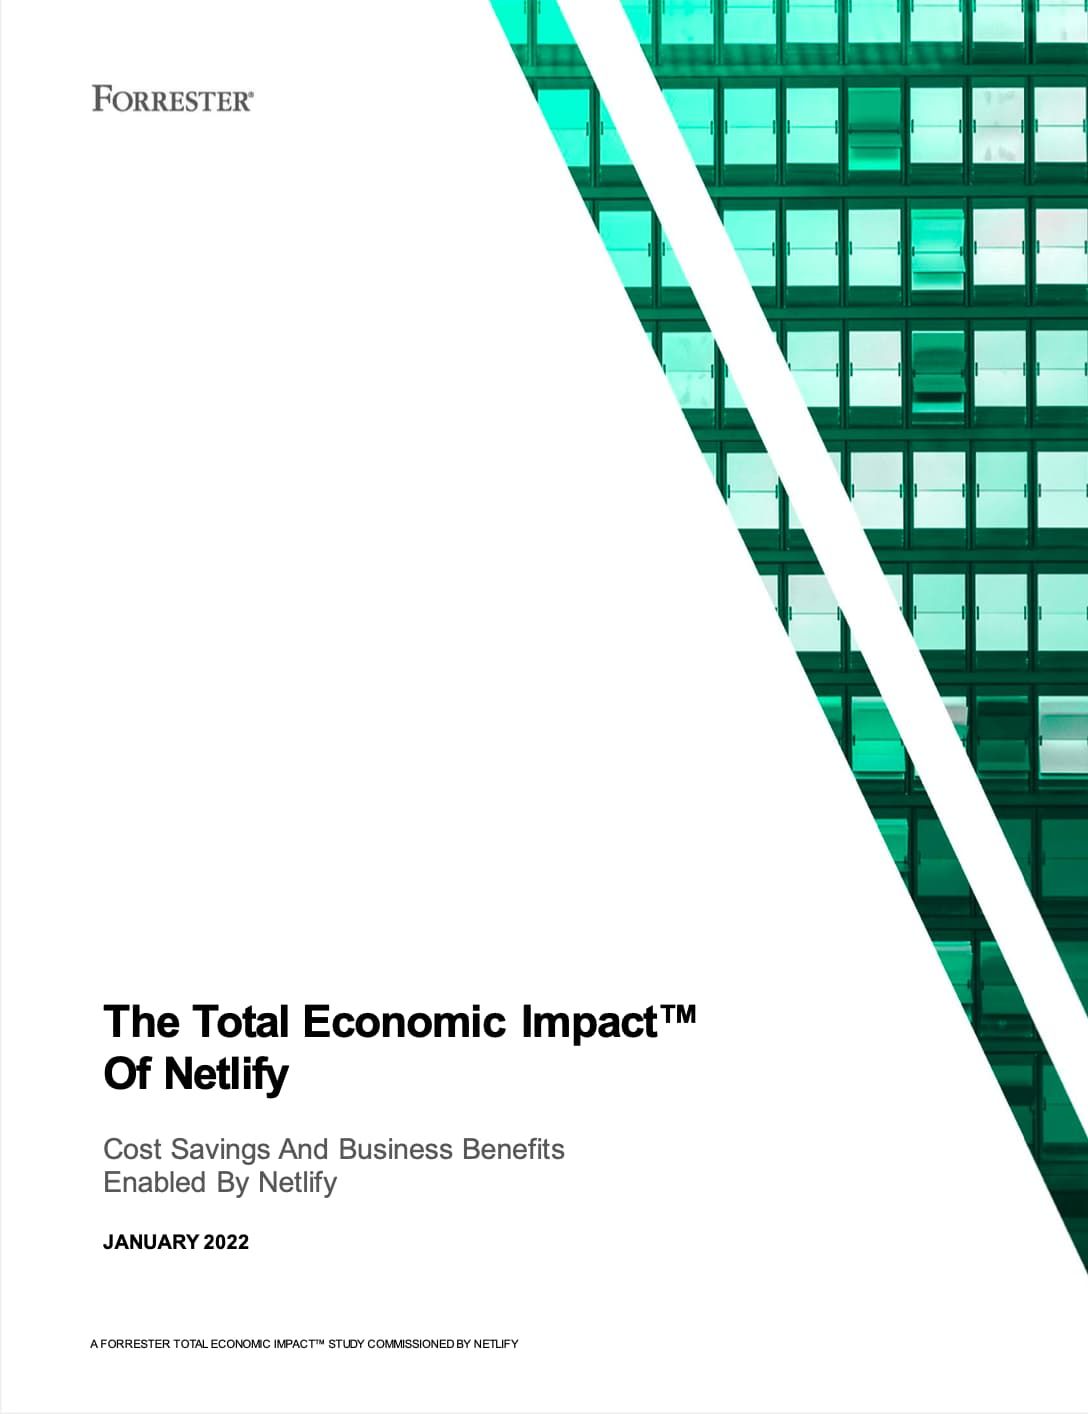 Forrester Report - The Total Economic Impact of Netlify